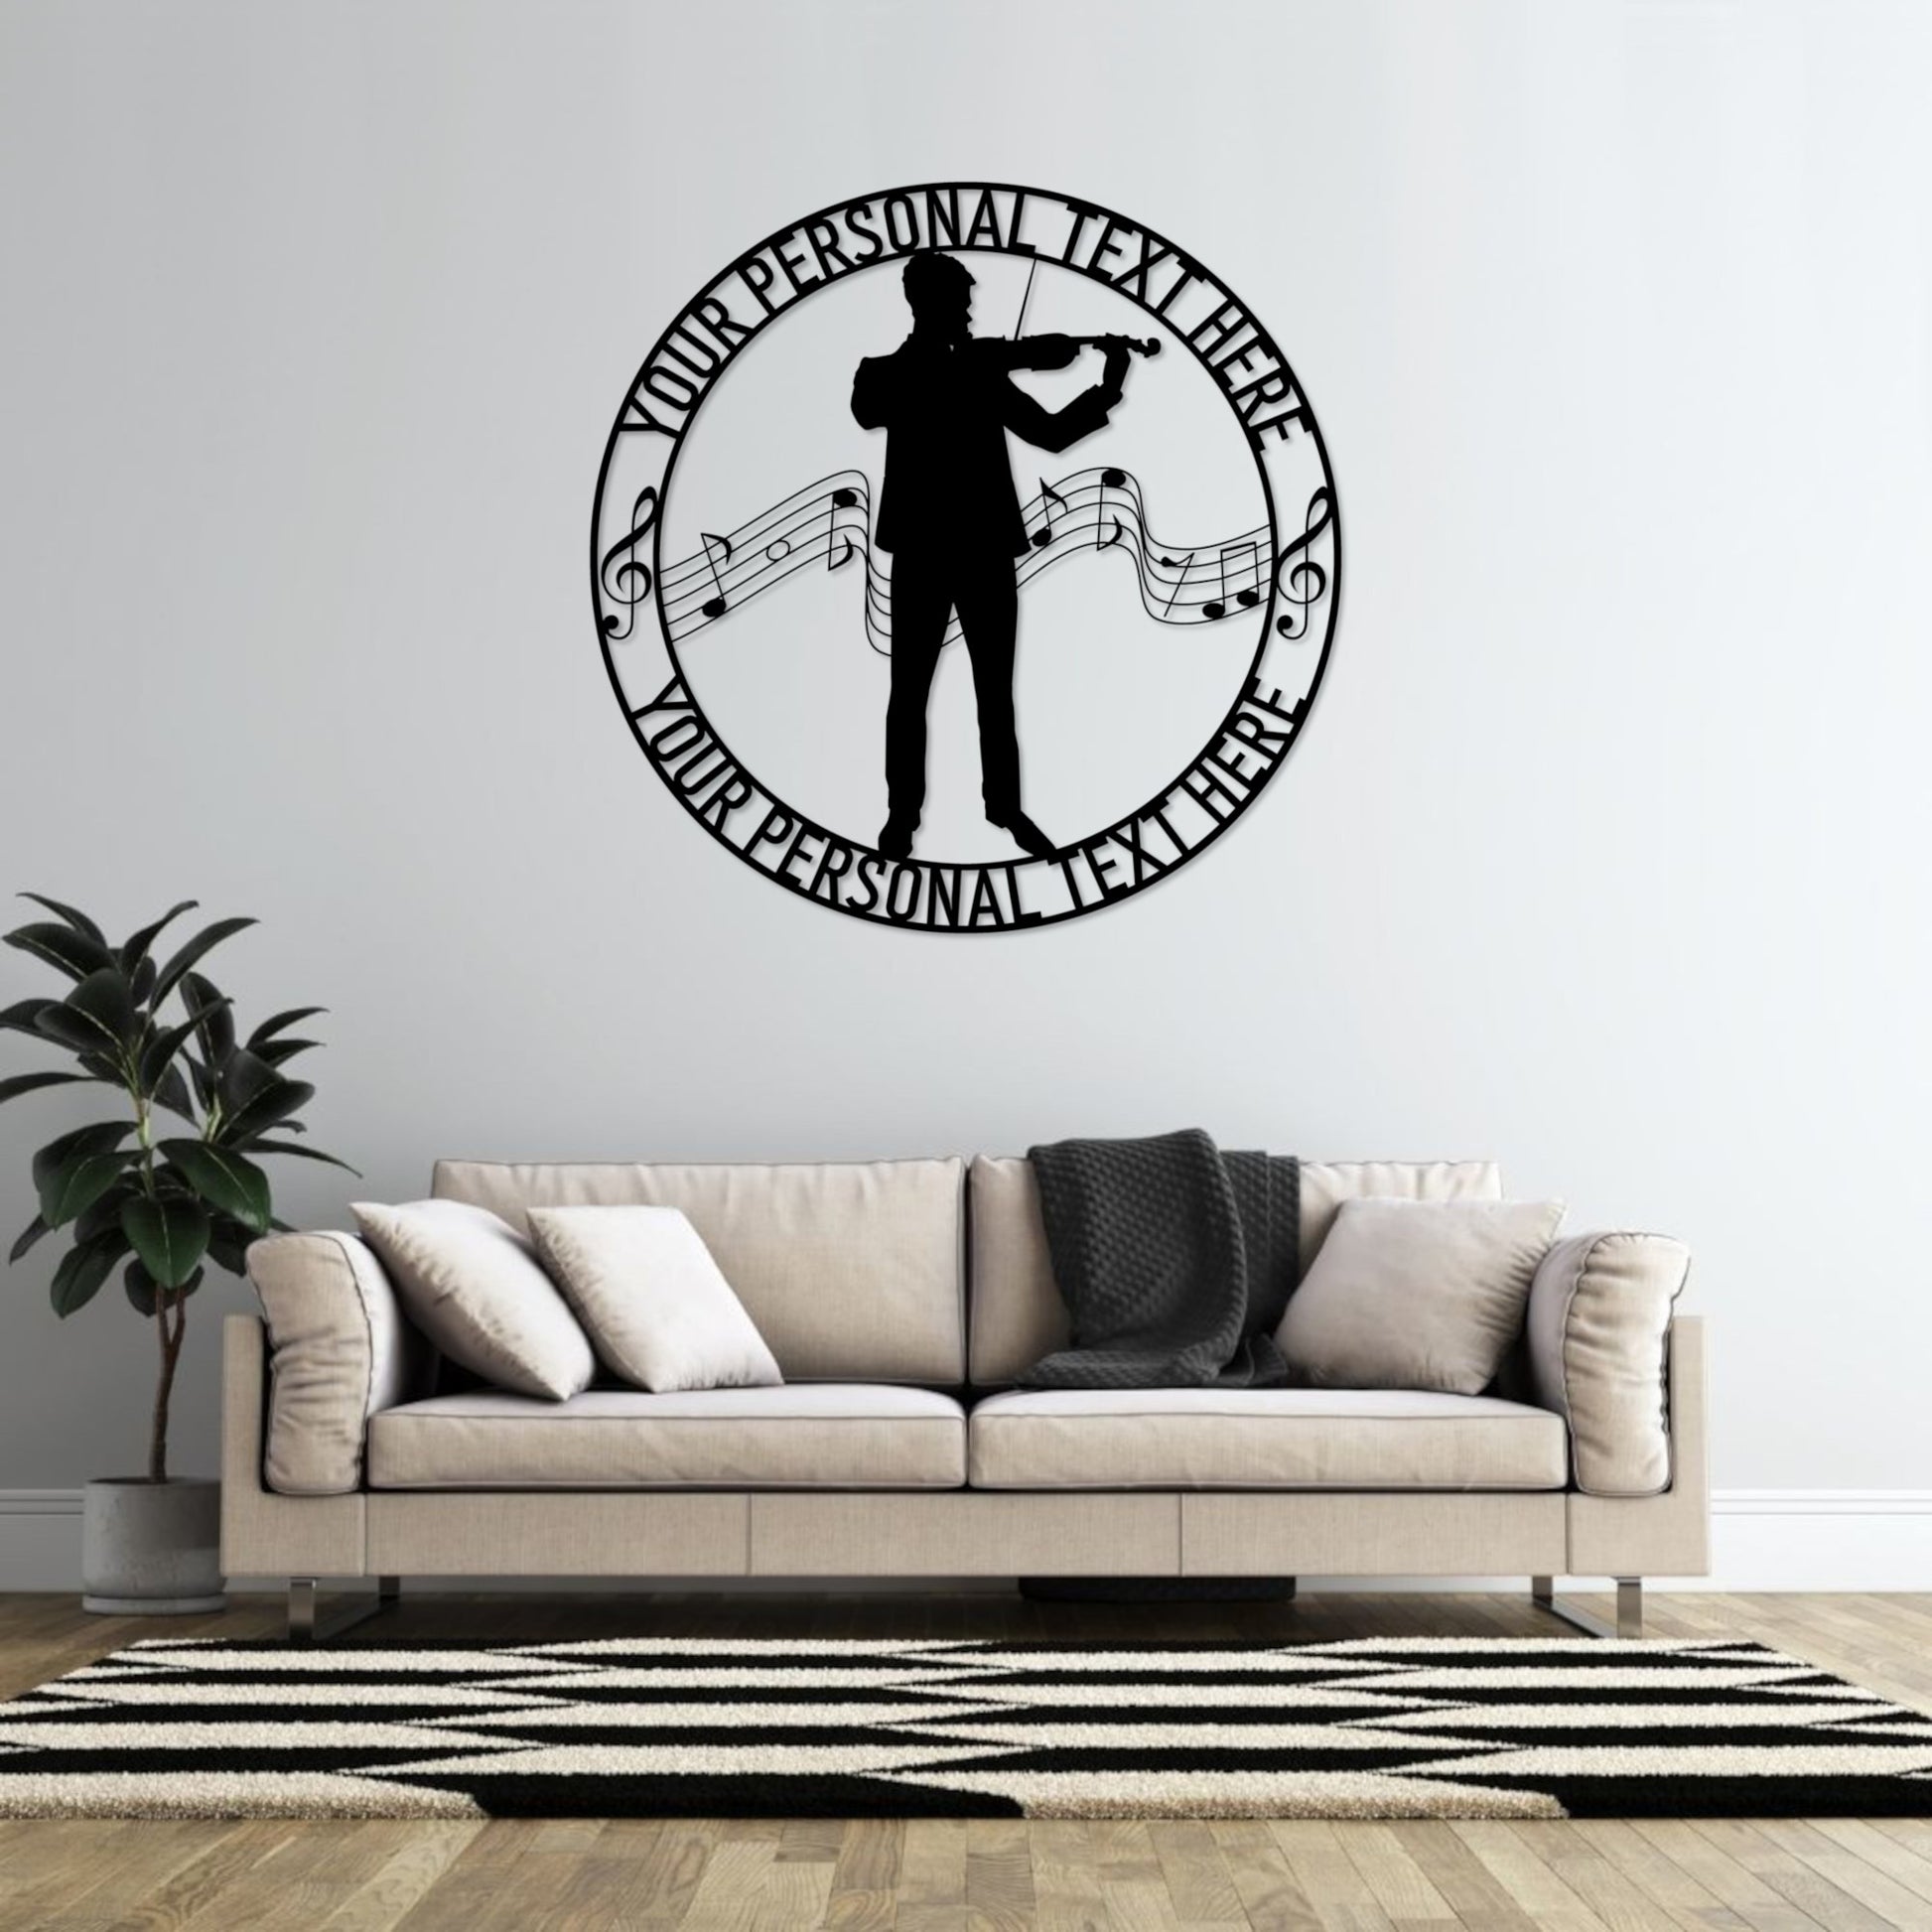 Personalized Male Violinist Name Metal Sign. Custom Violin Player Wall Decor. Musician Entertainer. Music Room Display. Musical Wall Hanging